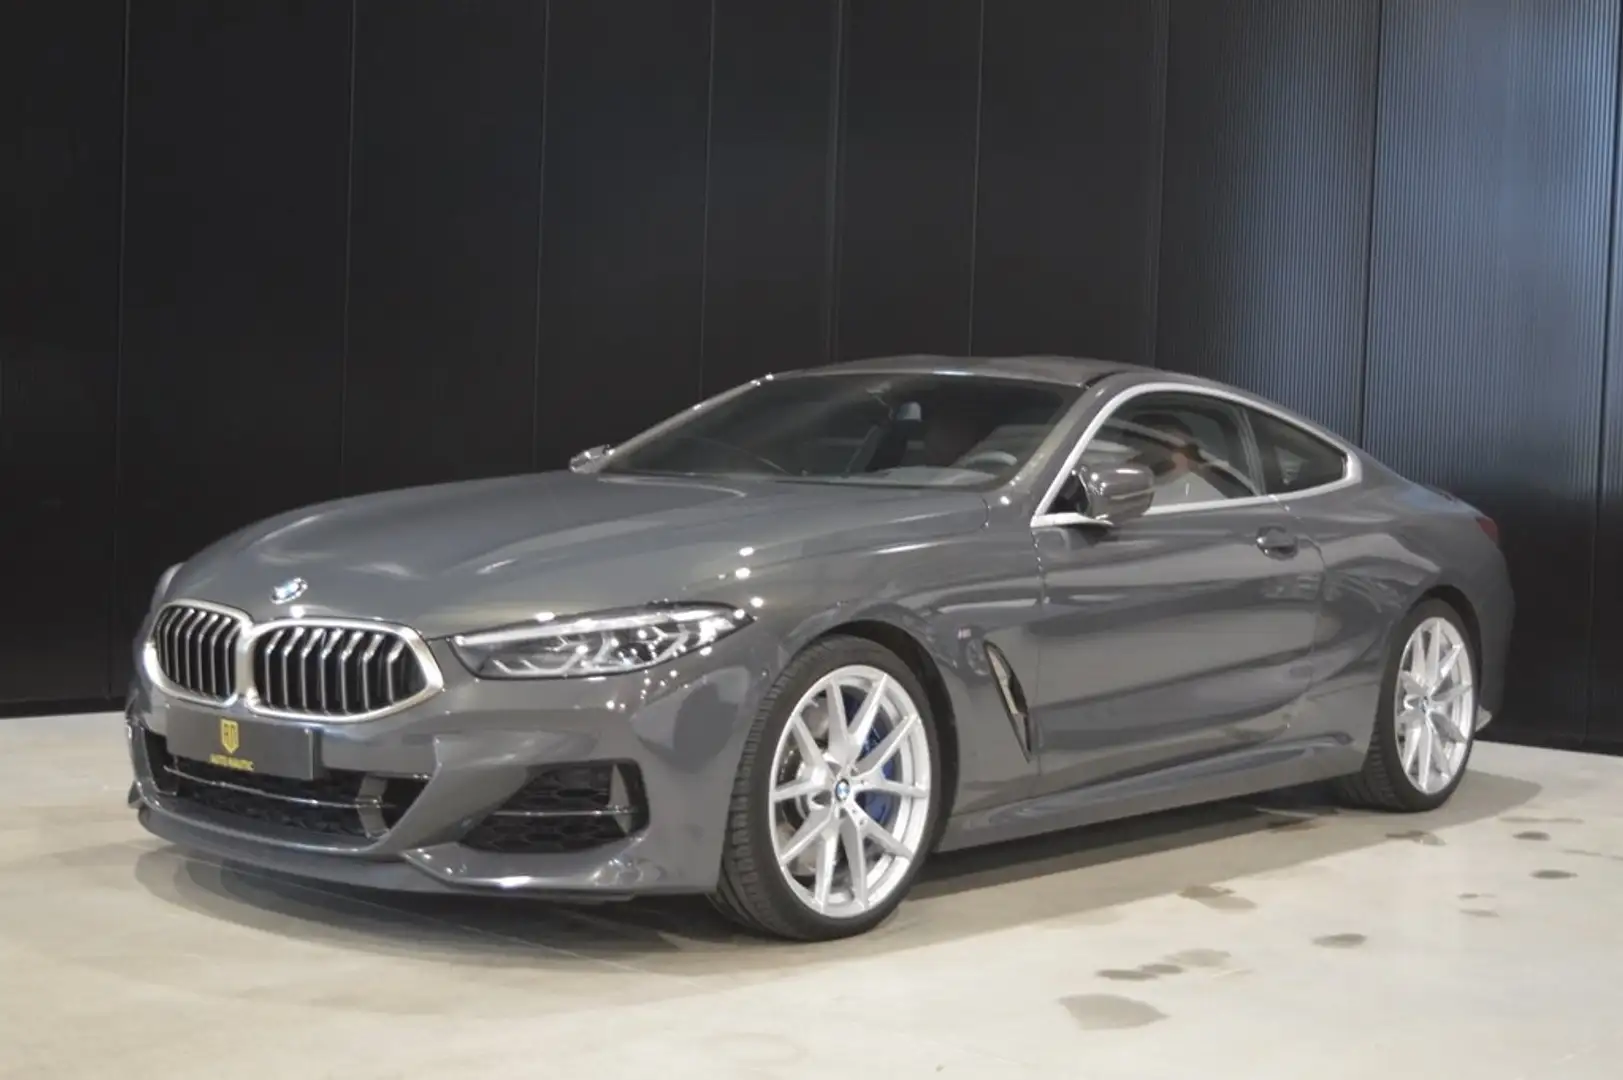 BMW 850 i xdrive 64.000 km ! Carbon pack ! Top condition ! Szary - 1